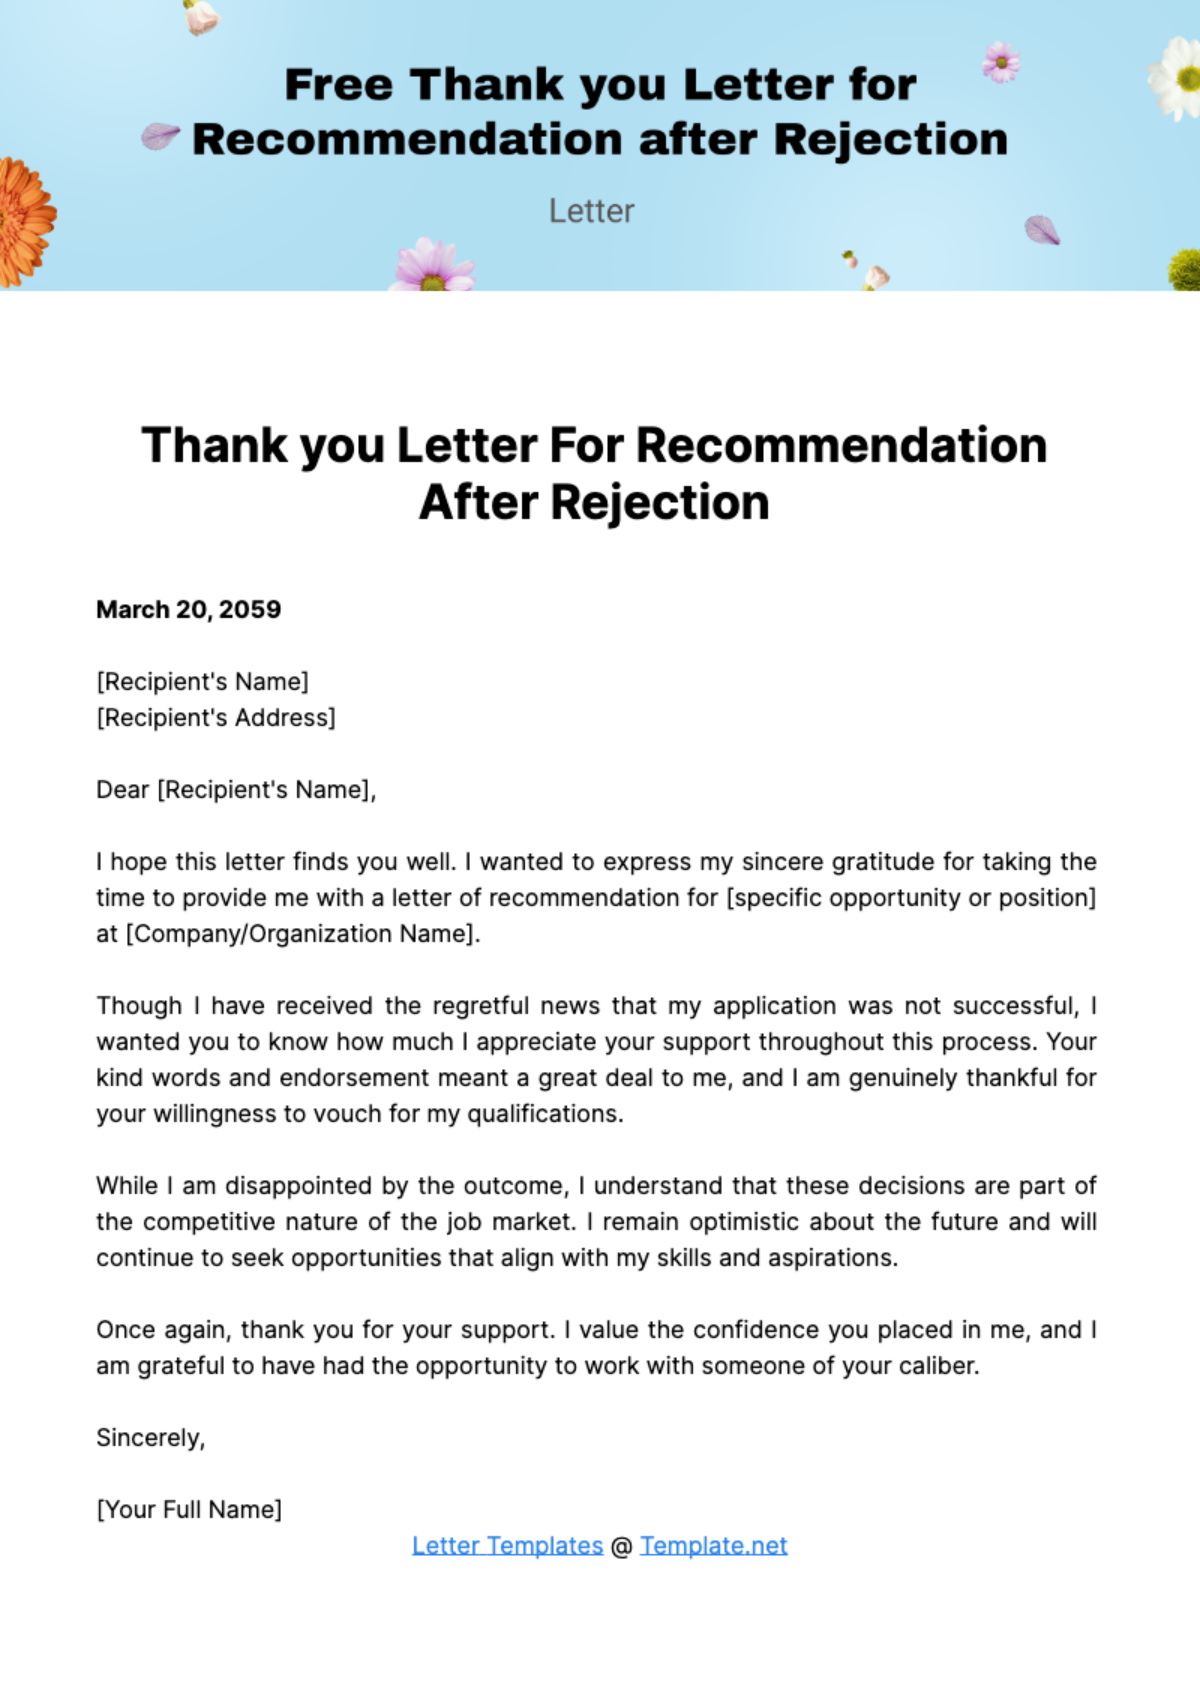 Thank you Letter for Recommendation after Rejection Template